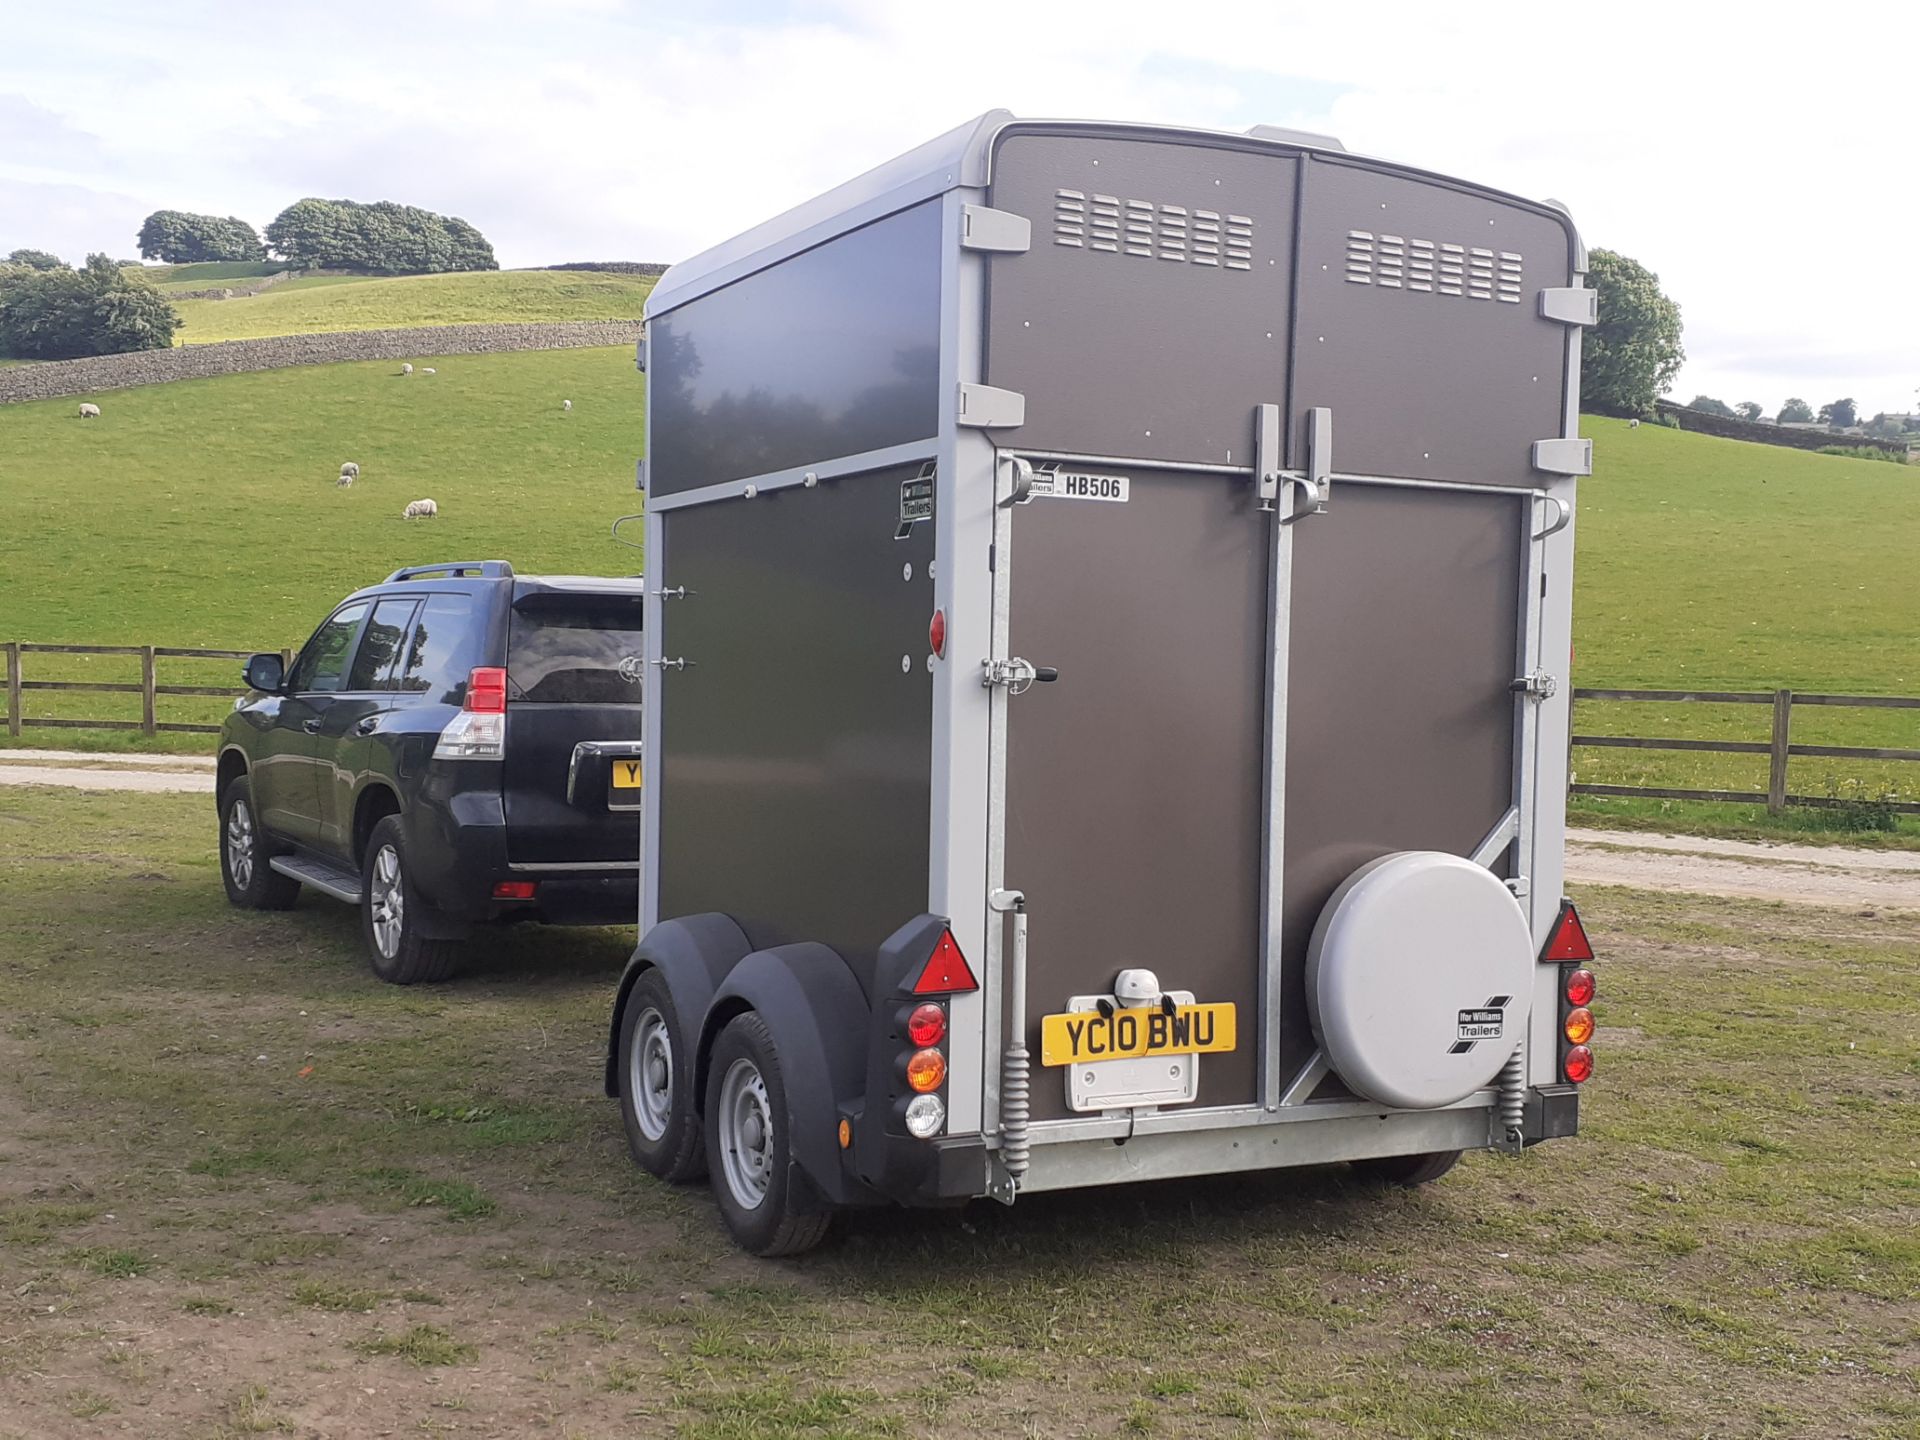 2018 IFOR WILLIAMS HB506 HORSE BOX TRAILER, 18 MONTH WAITING LIST FOR THIS MODEL *NO VAT* - Image 3 of 6